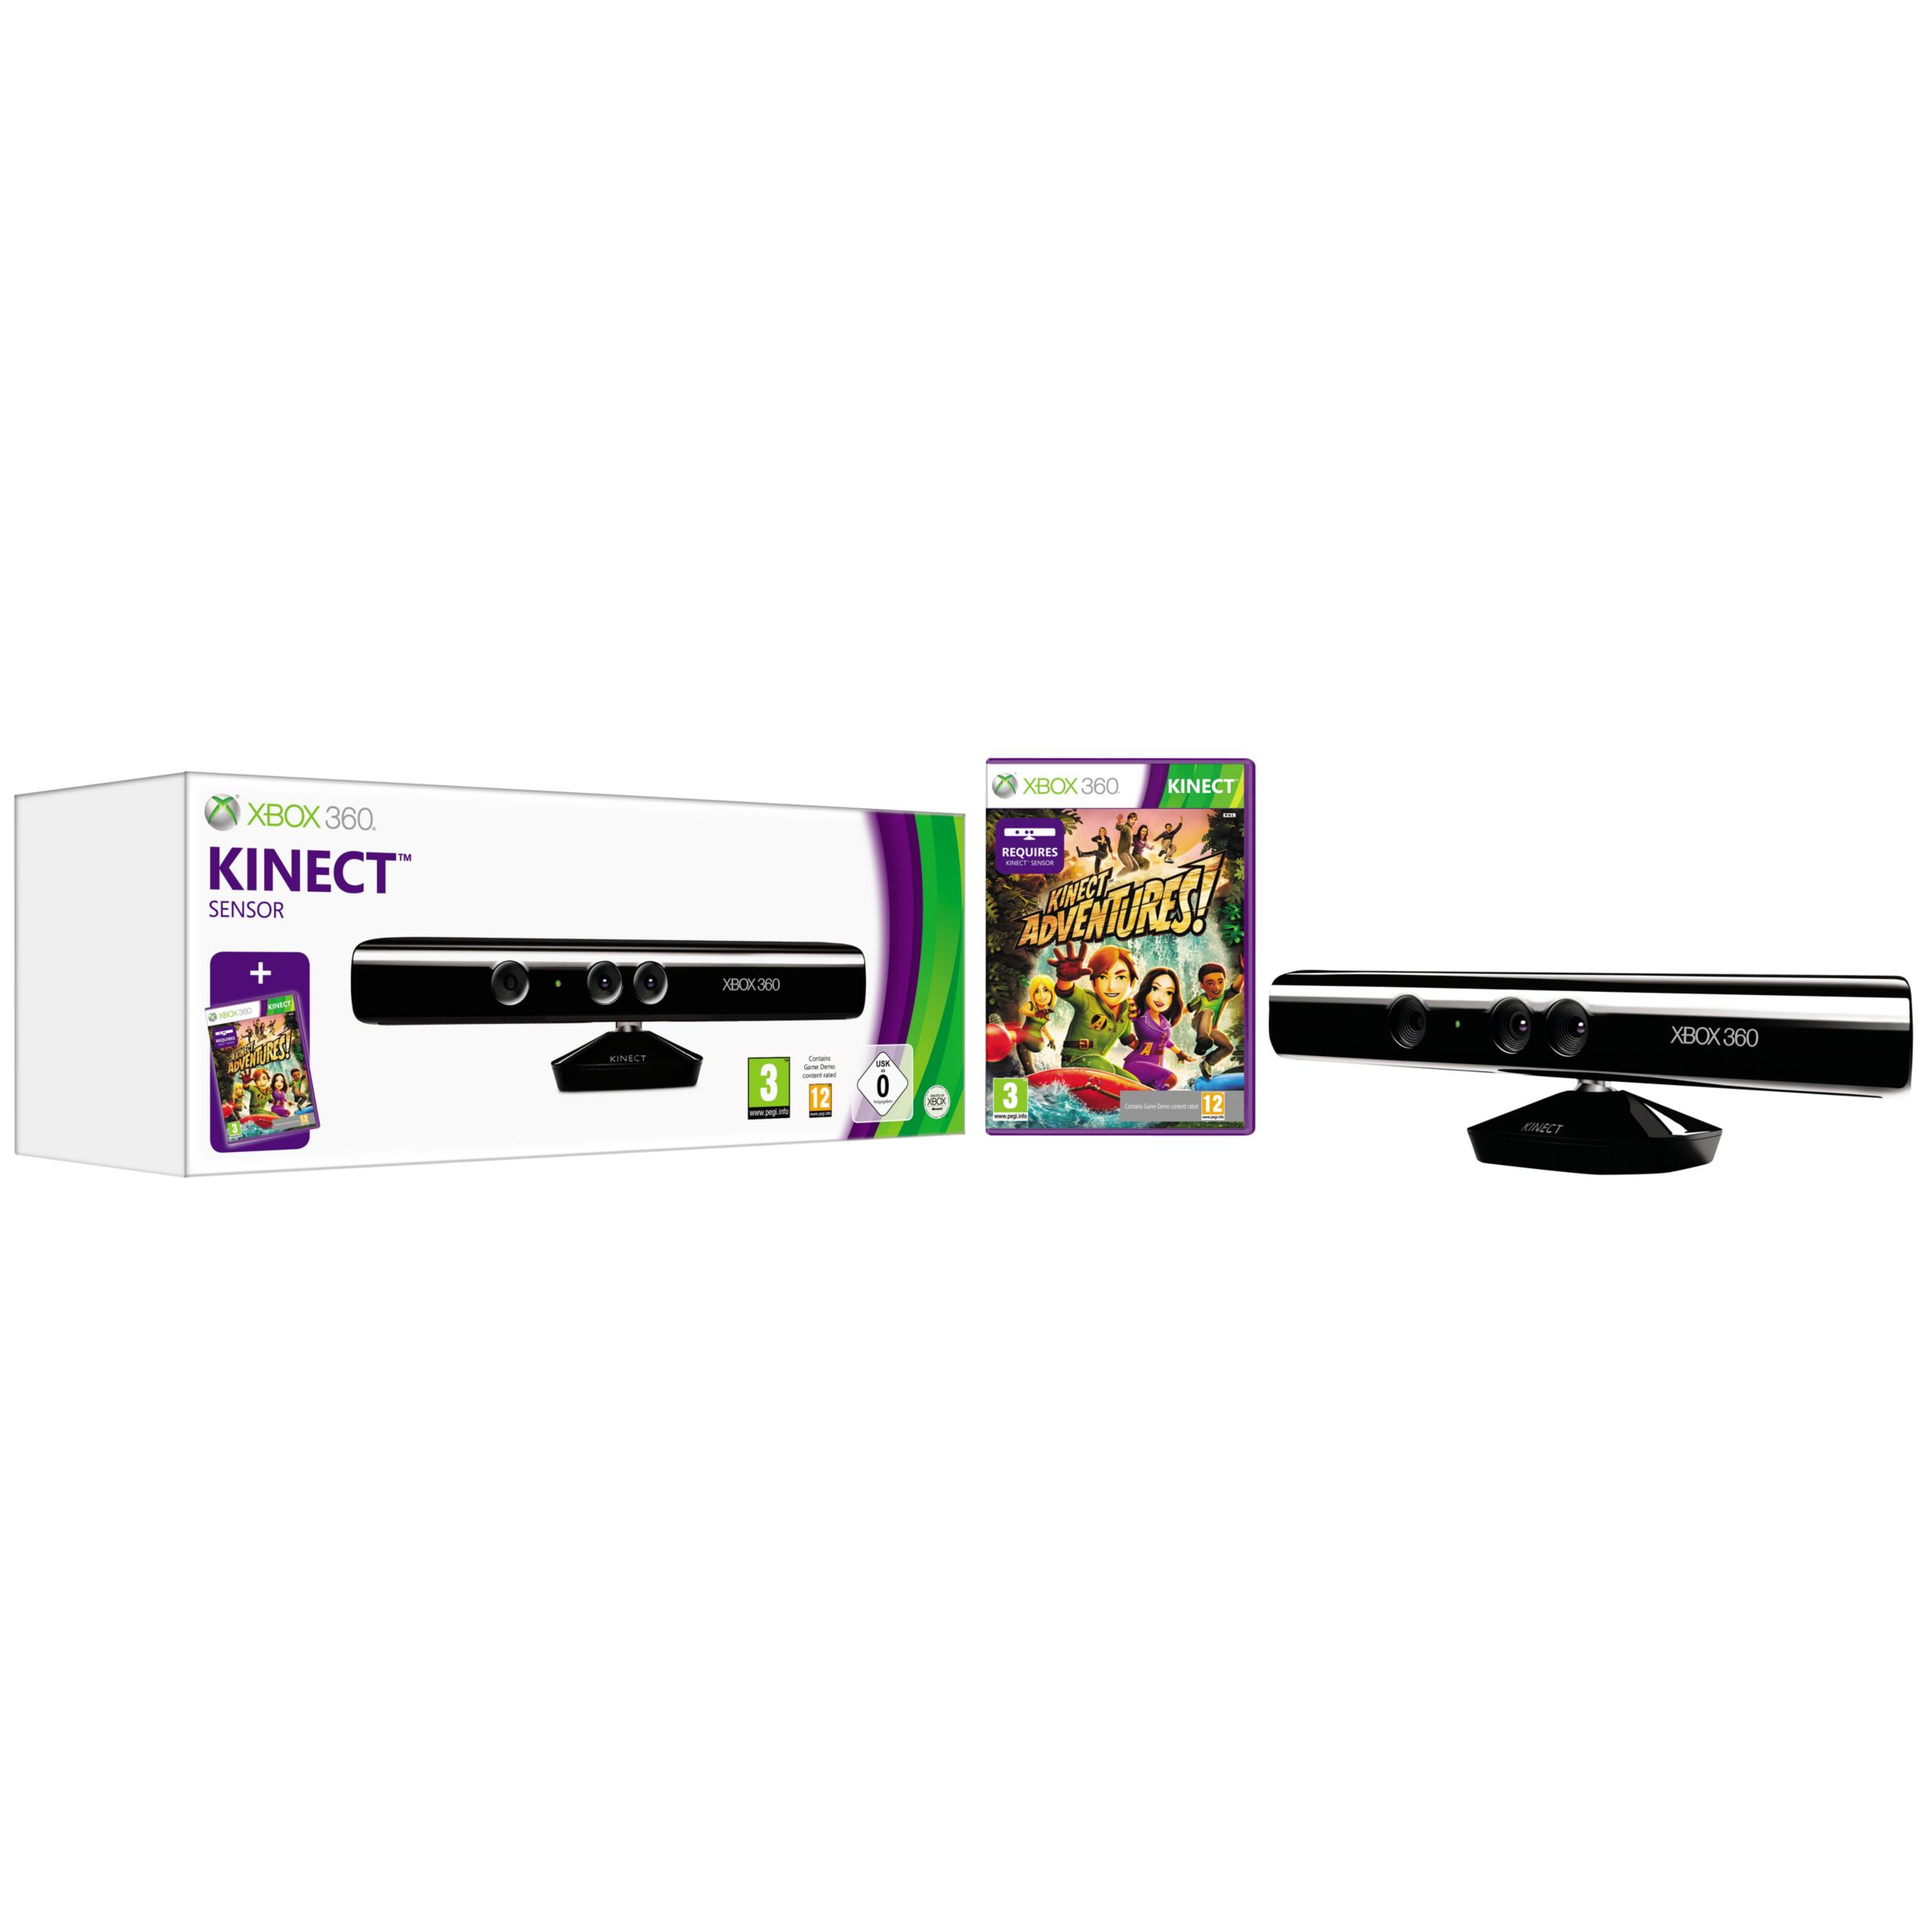 Microsoft Kinect Controller, Sports & Dance Central for Xbox 360 at JohnLewis